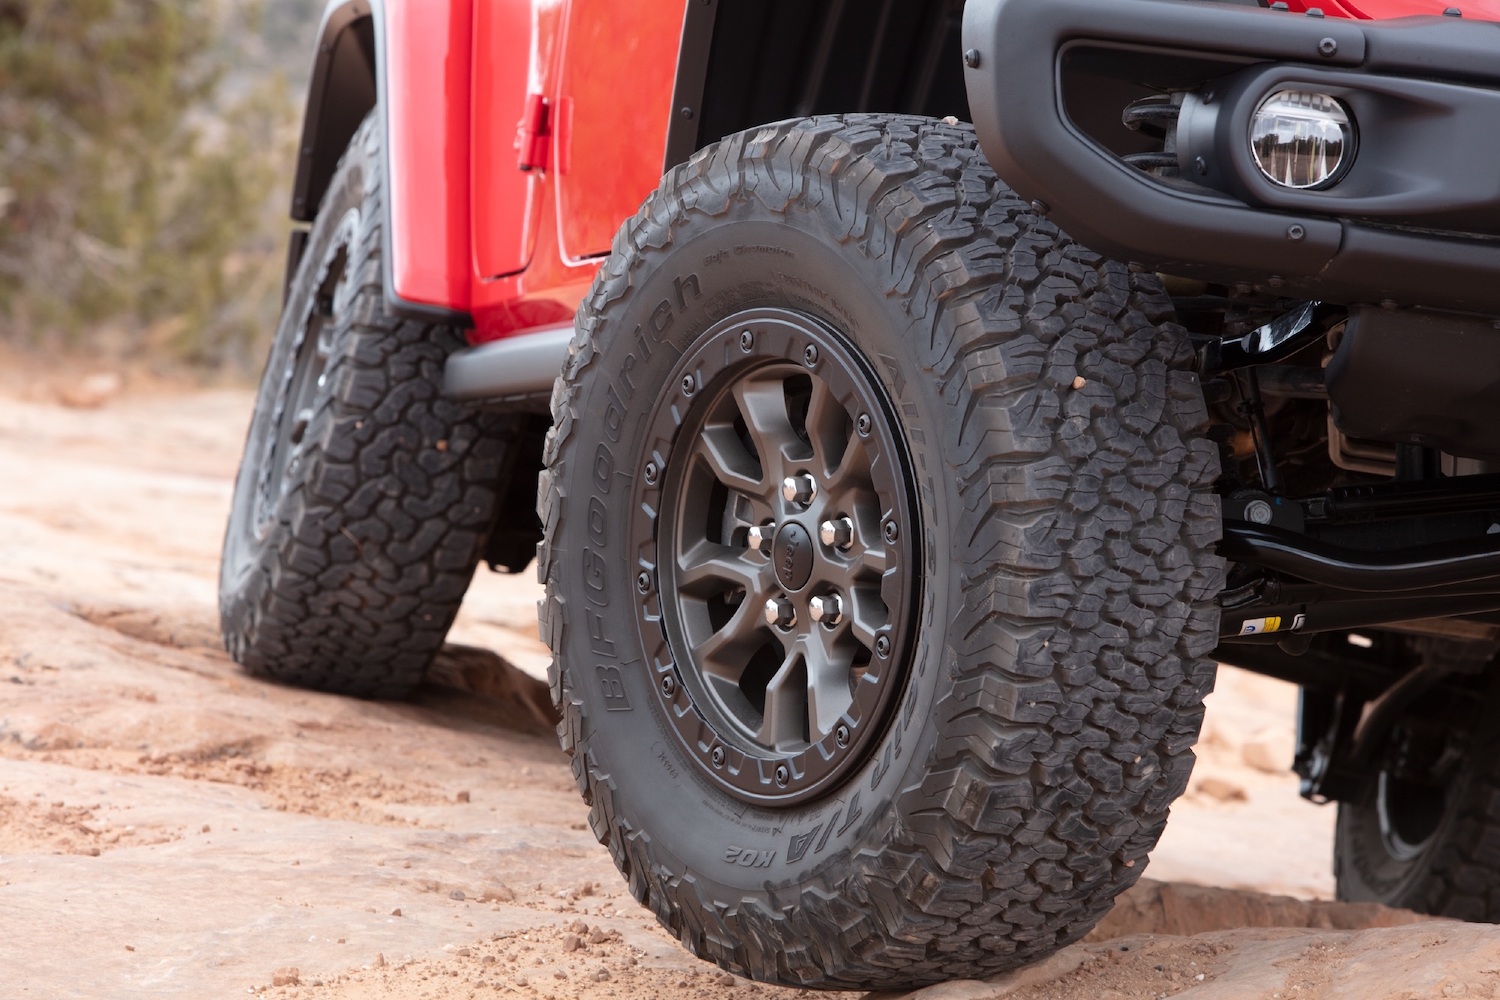 Closeup of a red Jeep Wrangler hybrid SUV with oversized tires navigating a 4x4 trail.